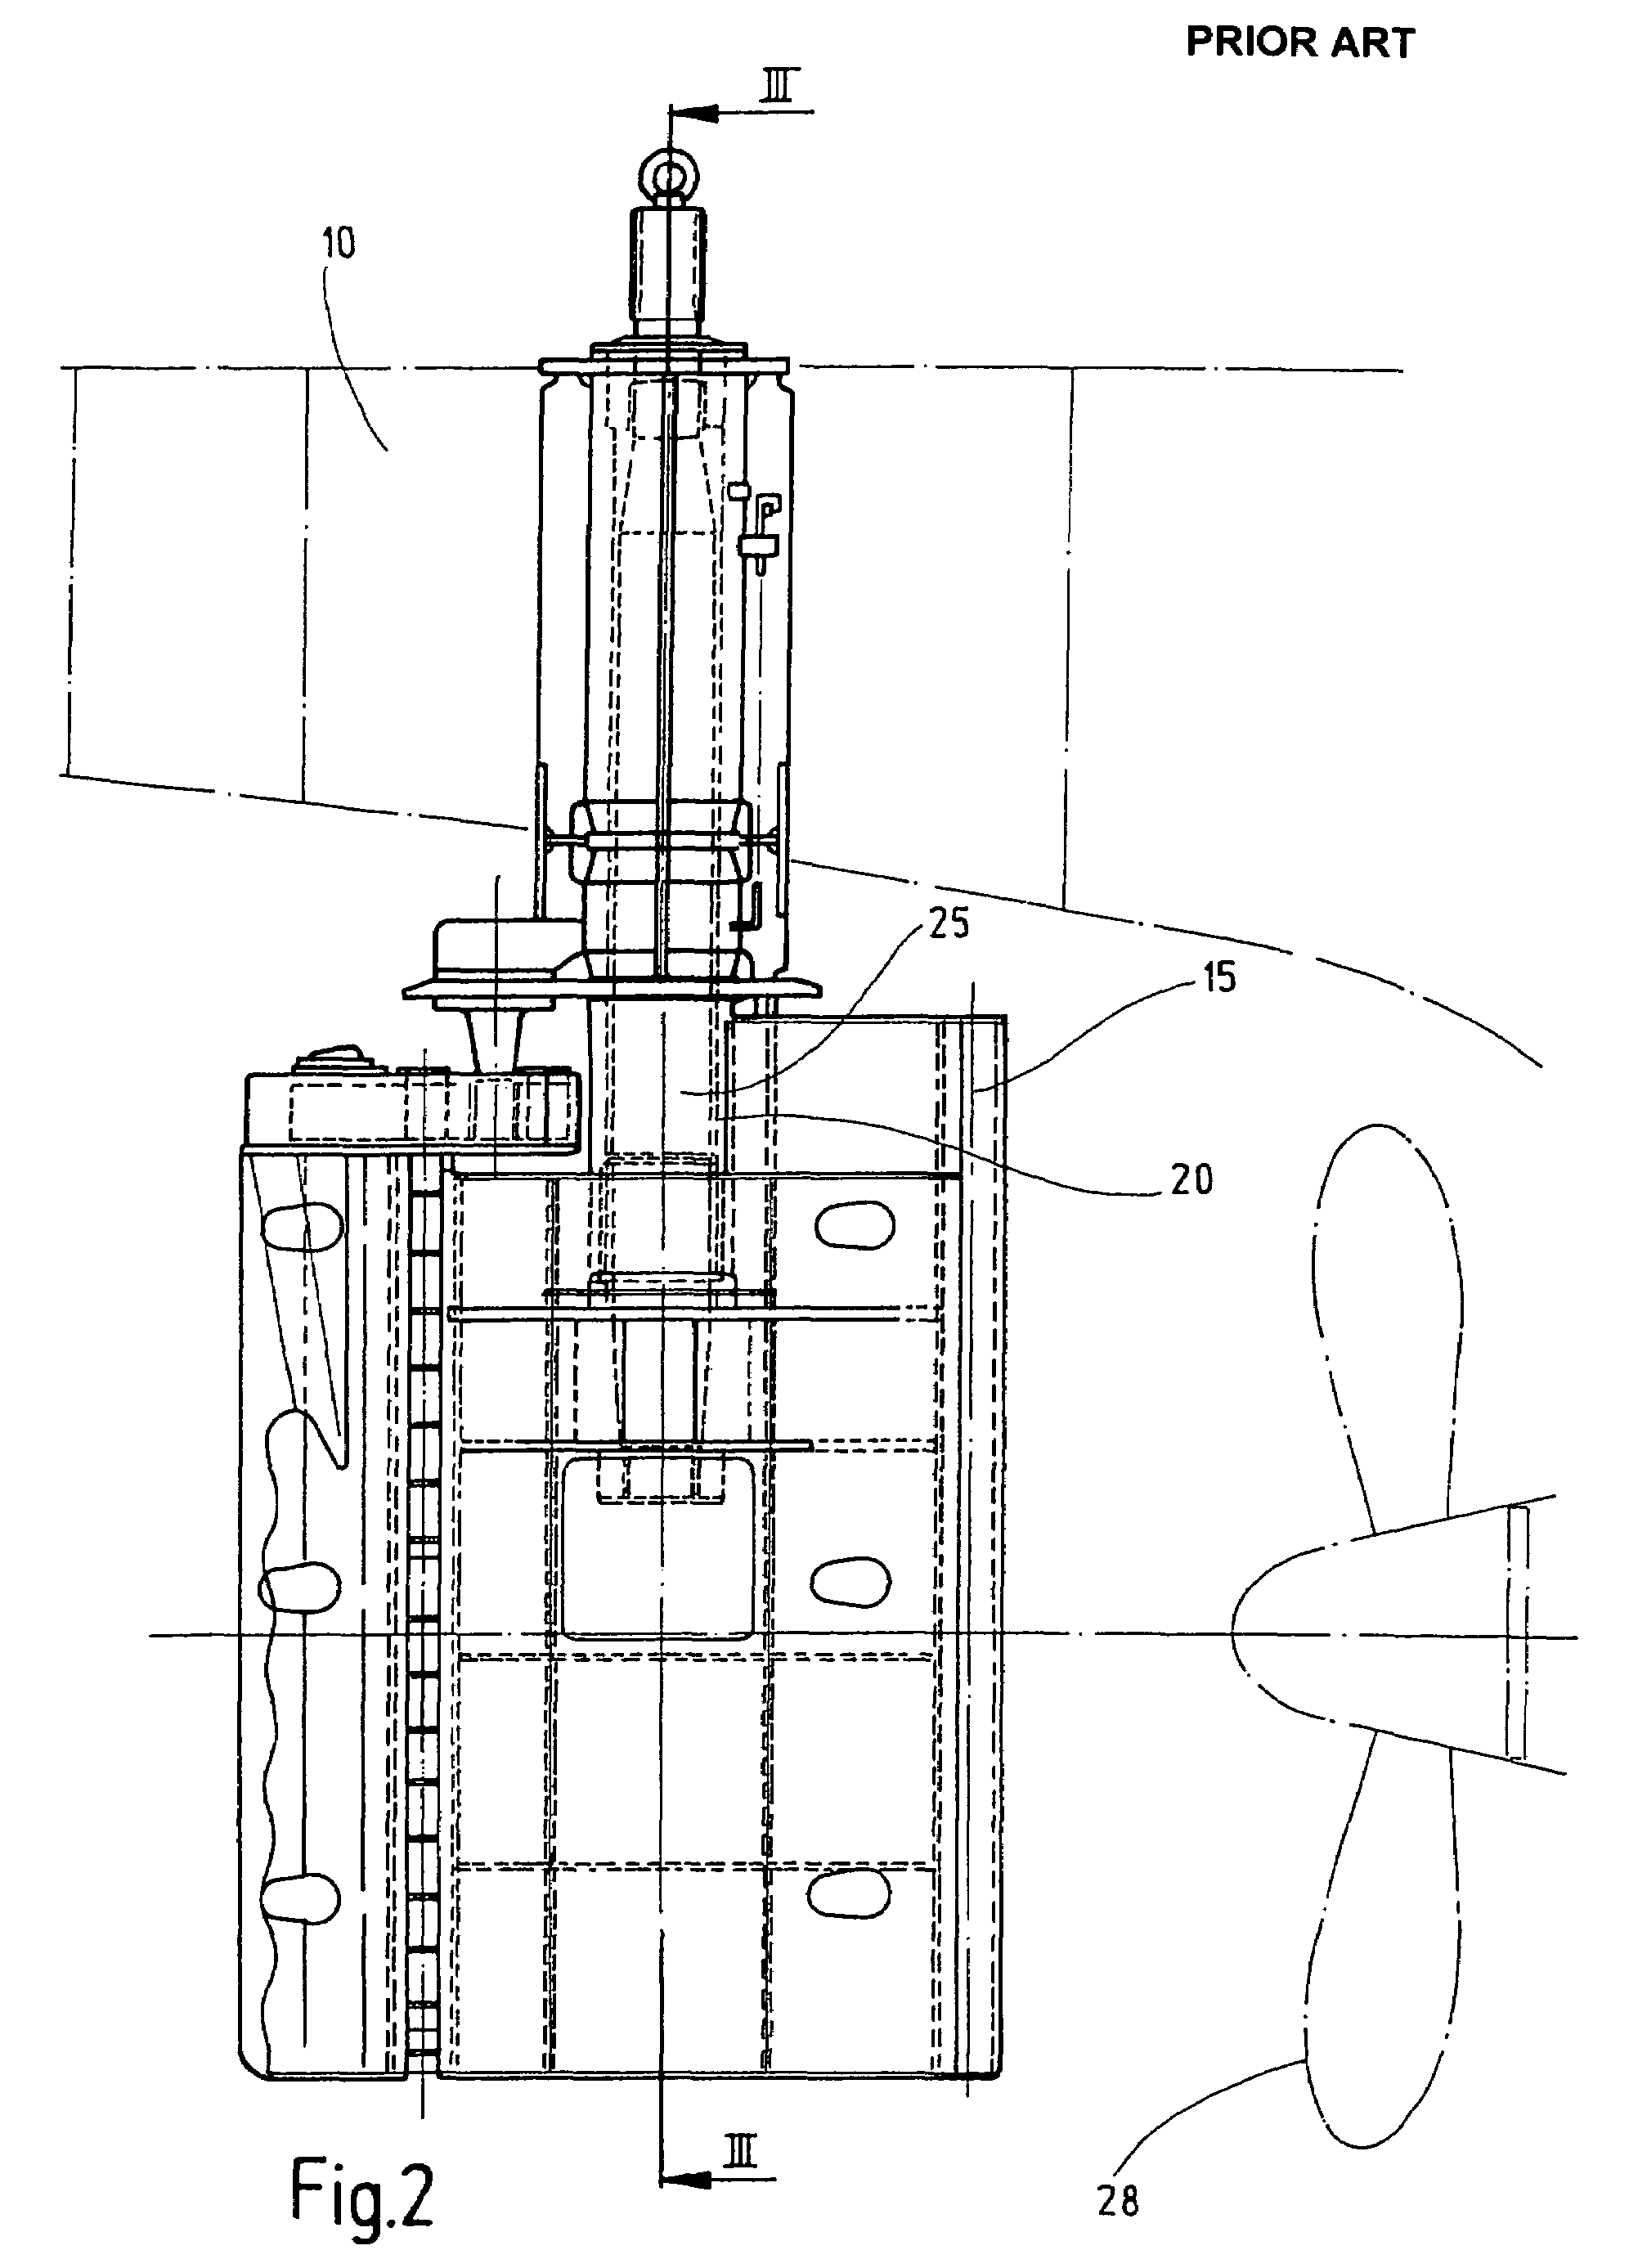 Device for the checking and measurement of the journal bearing clearance on the rudder shaft of a rudder for water-borne craft